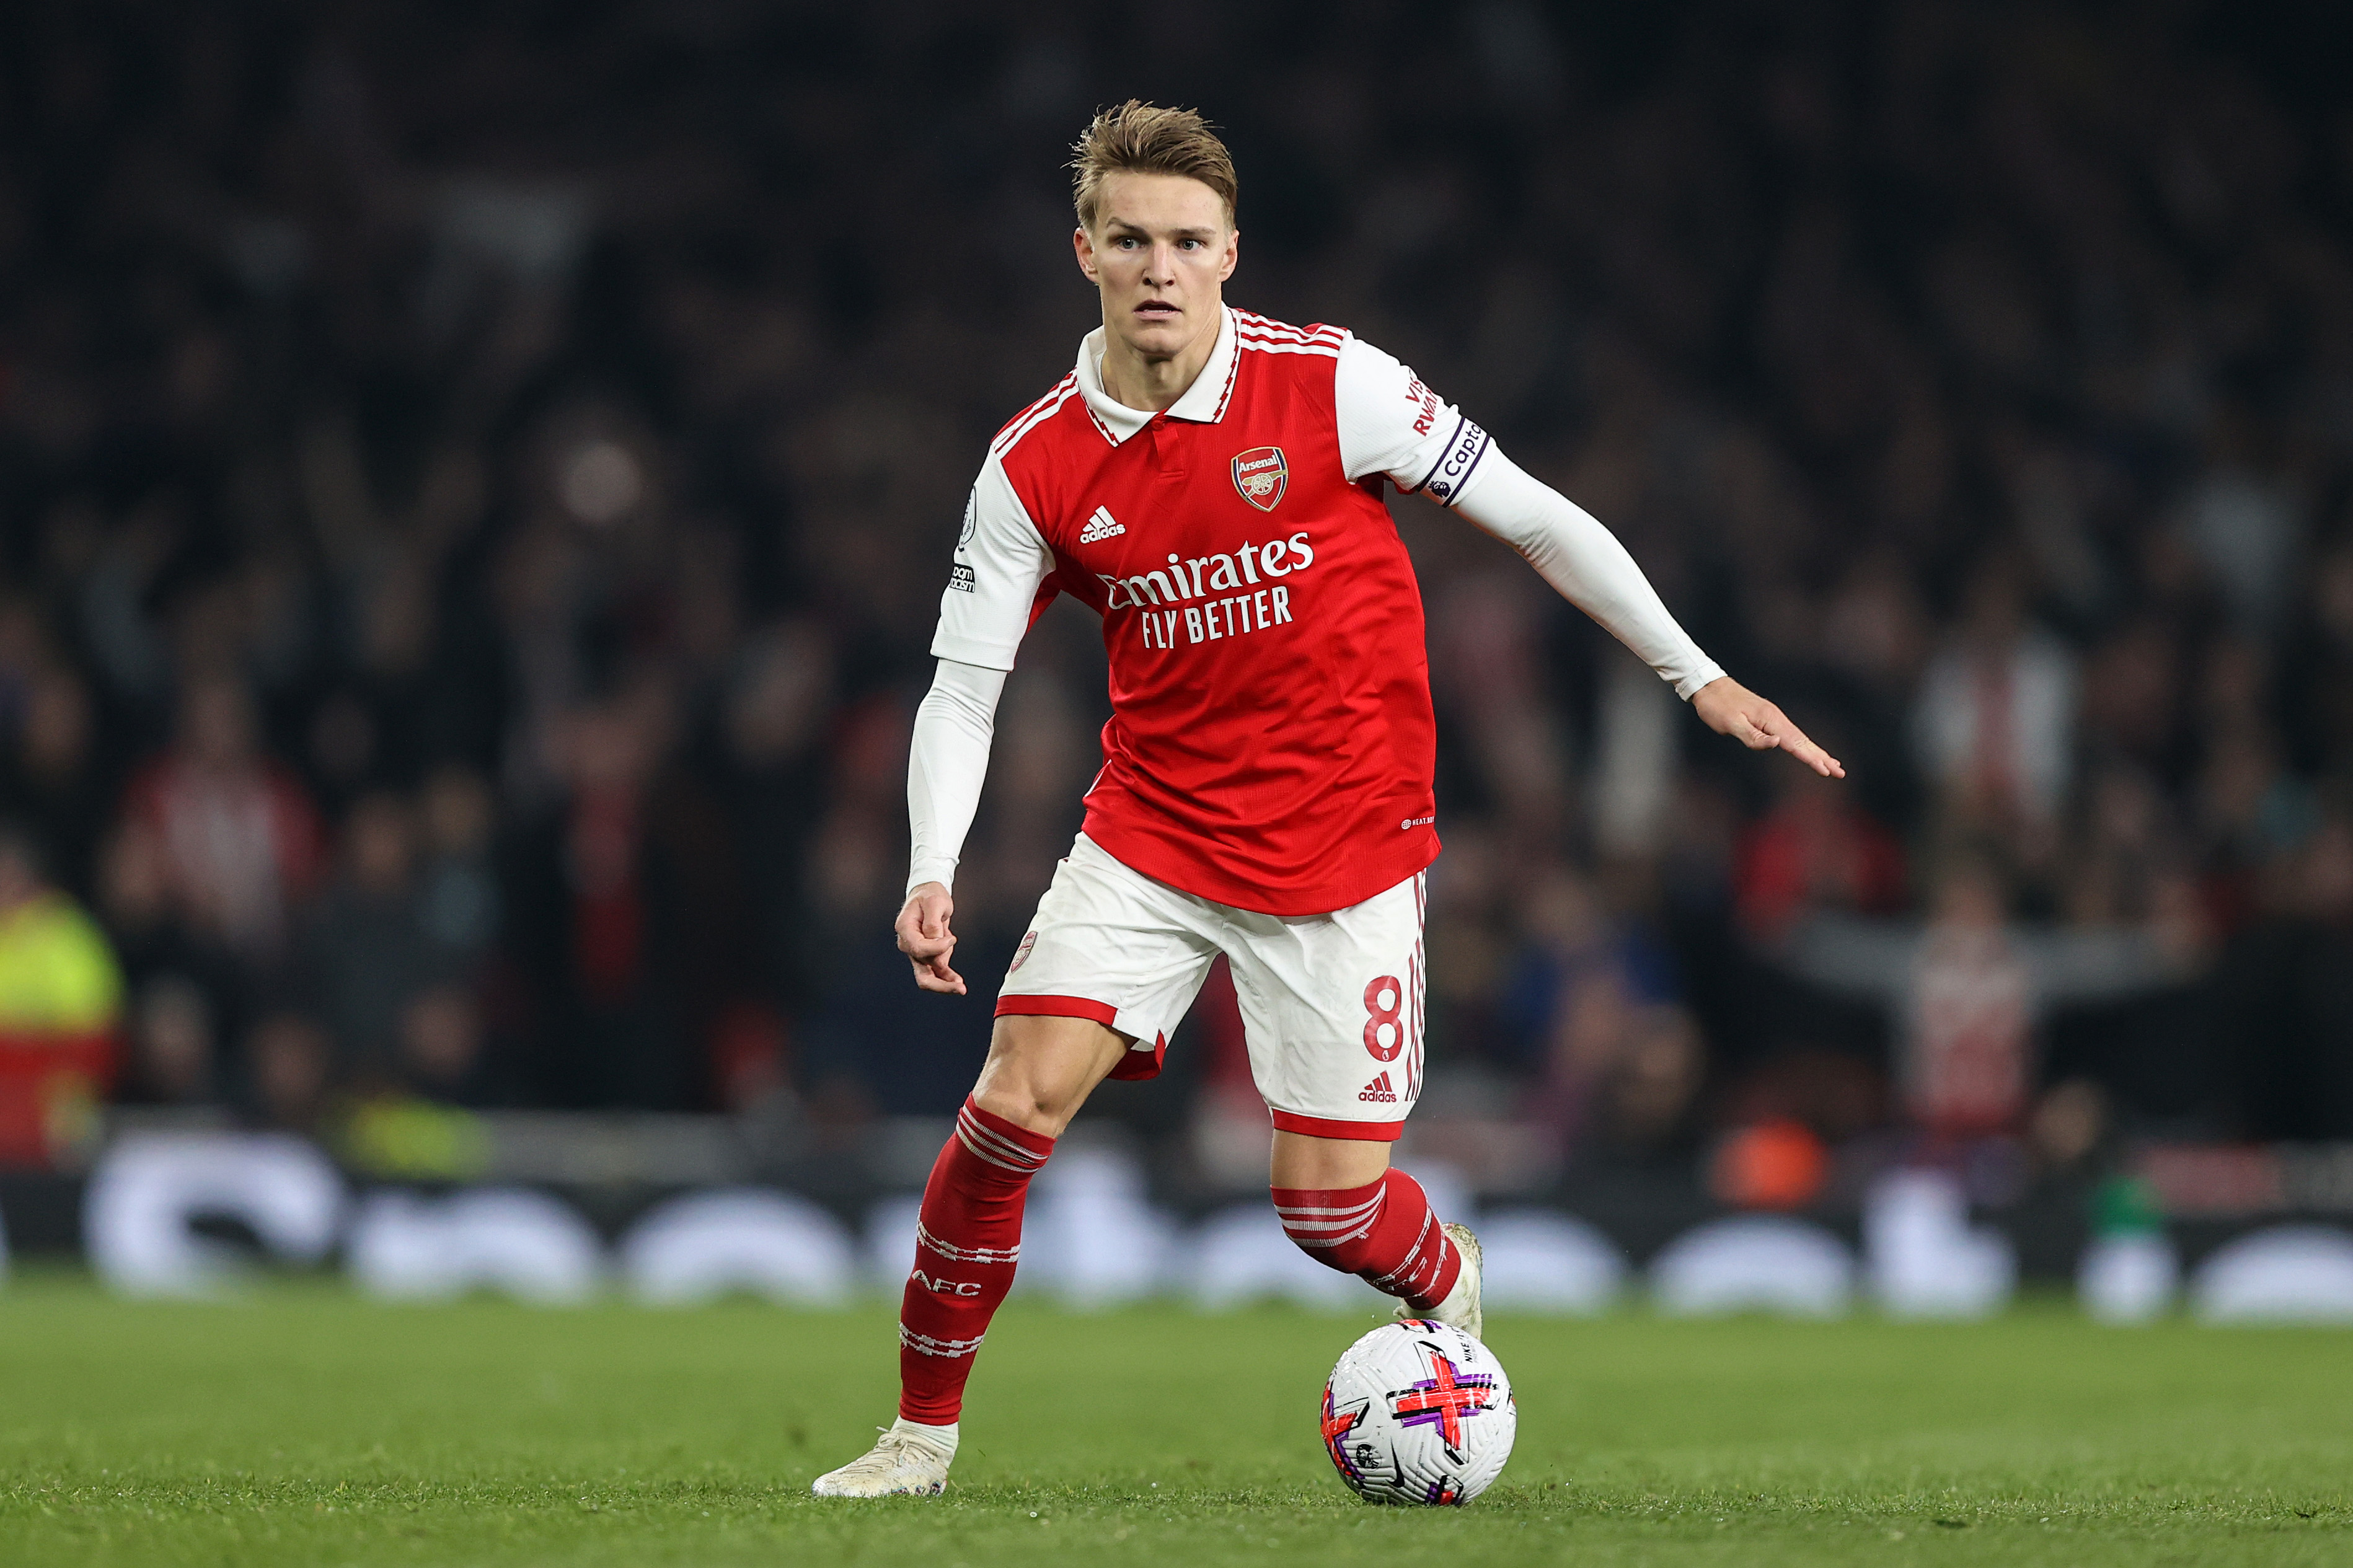 Arsenal captain Martin Odegaard after scoring two in 3-1 win over Chelsea: We have to fight and keep going - We believe and will fight until the end